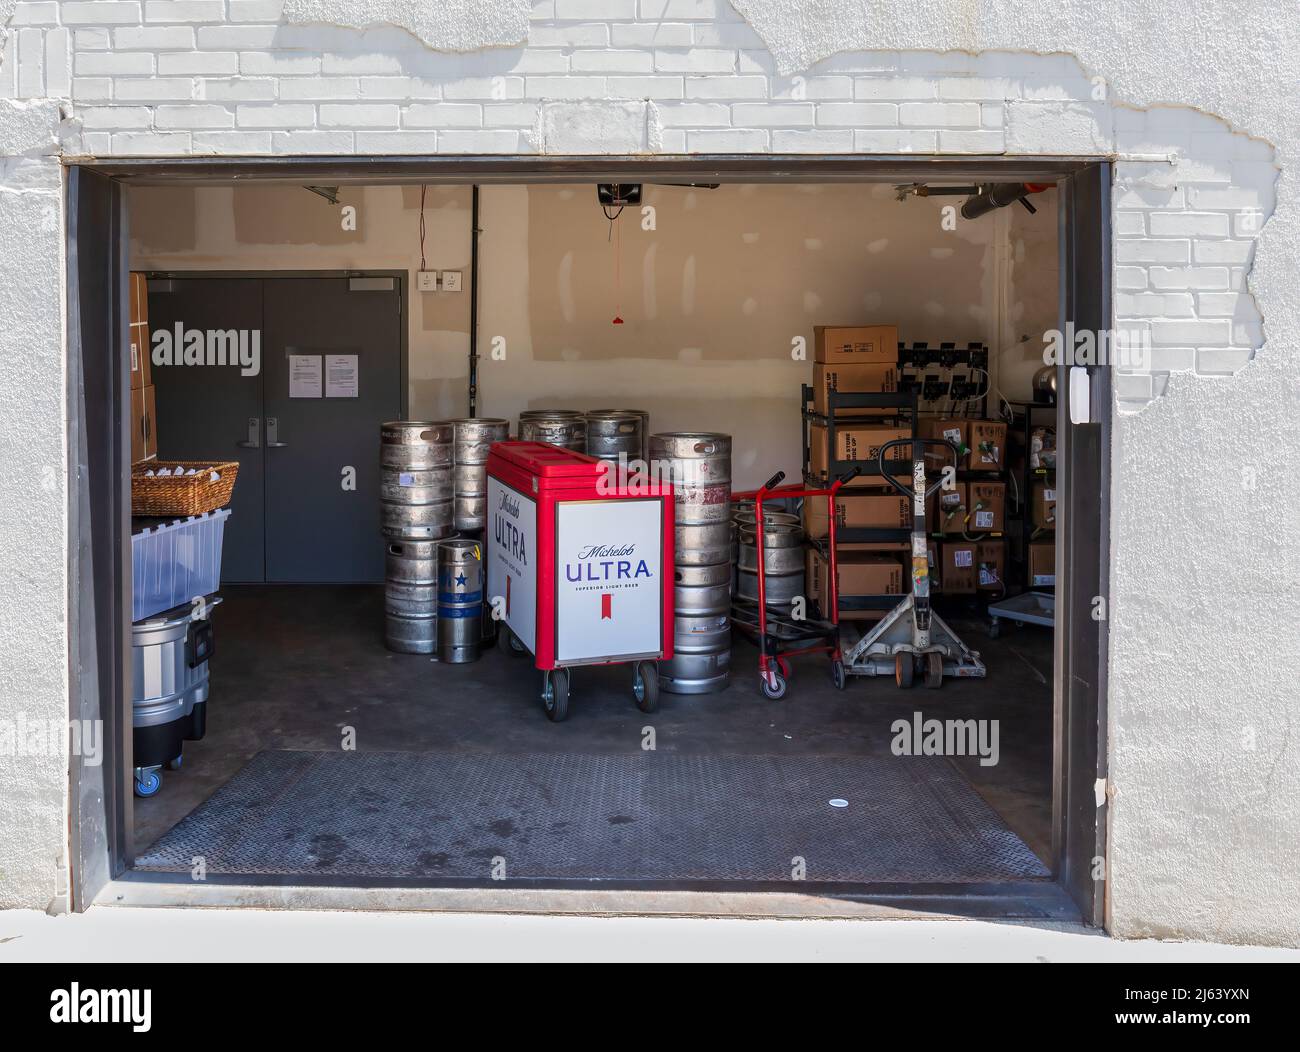 GREER, SC, USA 24 APRIL 2022: View thru bay door of storage room showing beer kegs and a rolling cart advertising Michelob Ultra beer. Stock Photo